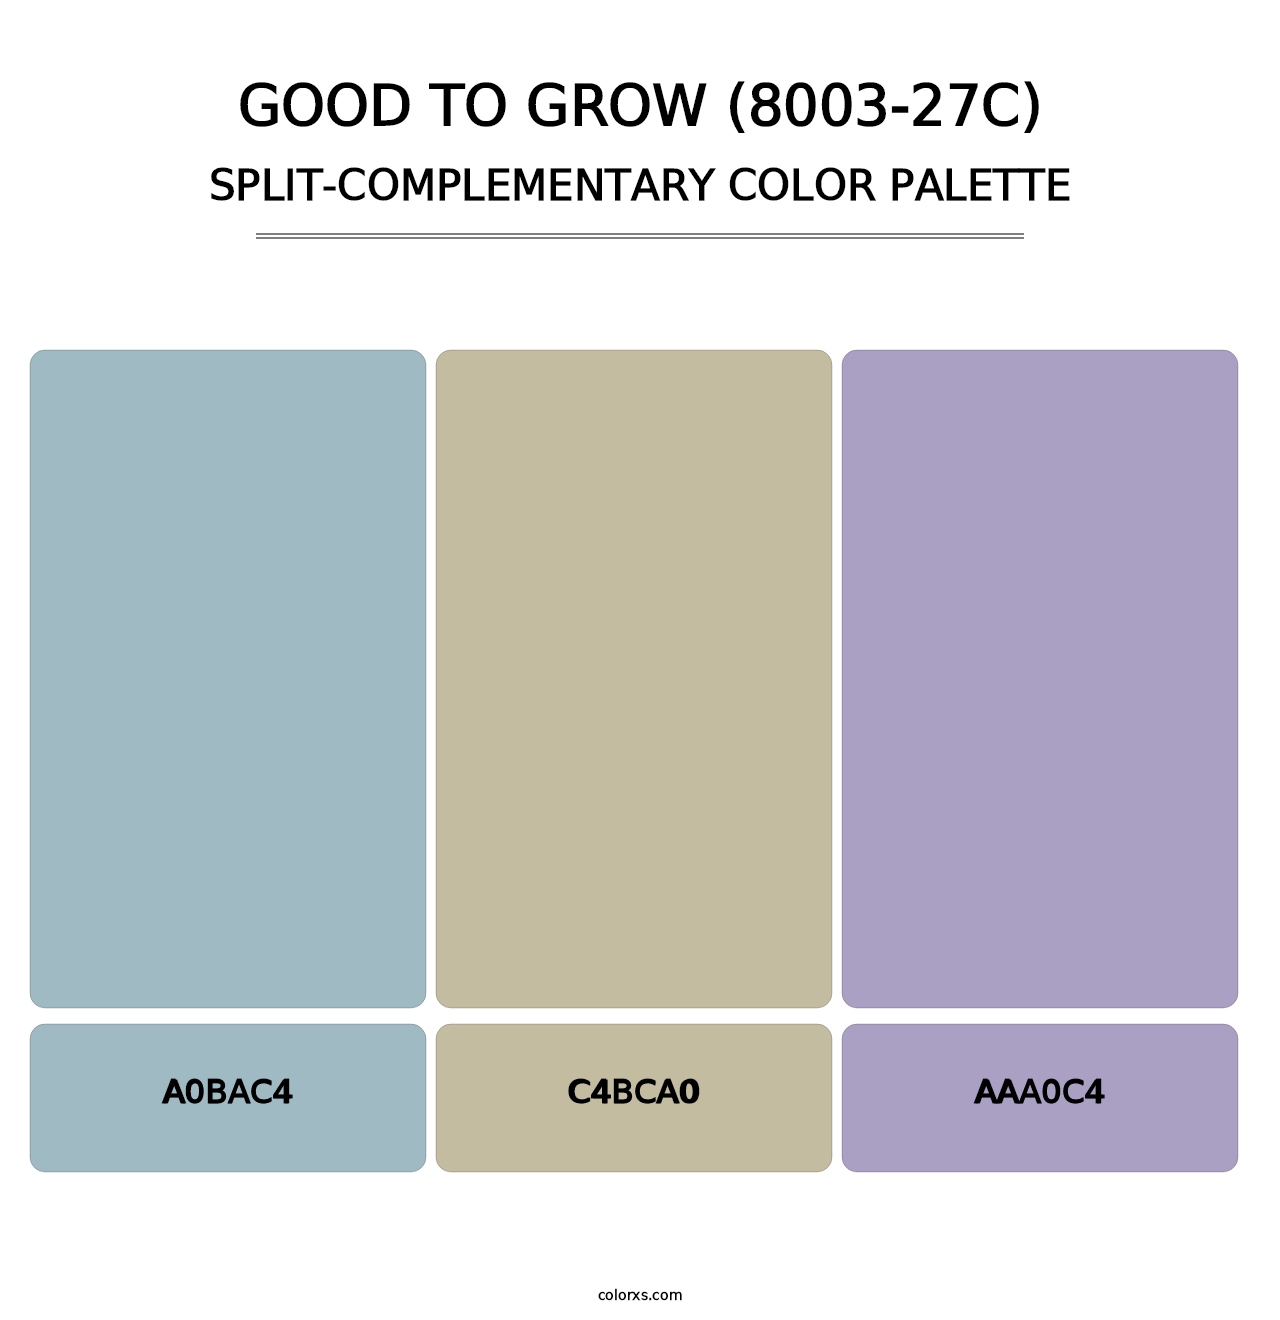 Good to Grow (8003-27C) - Split-Complementary Color Palette